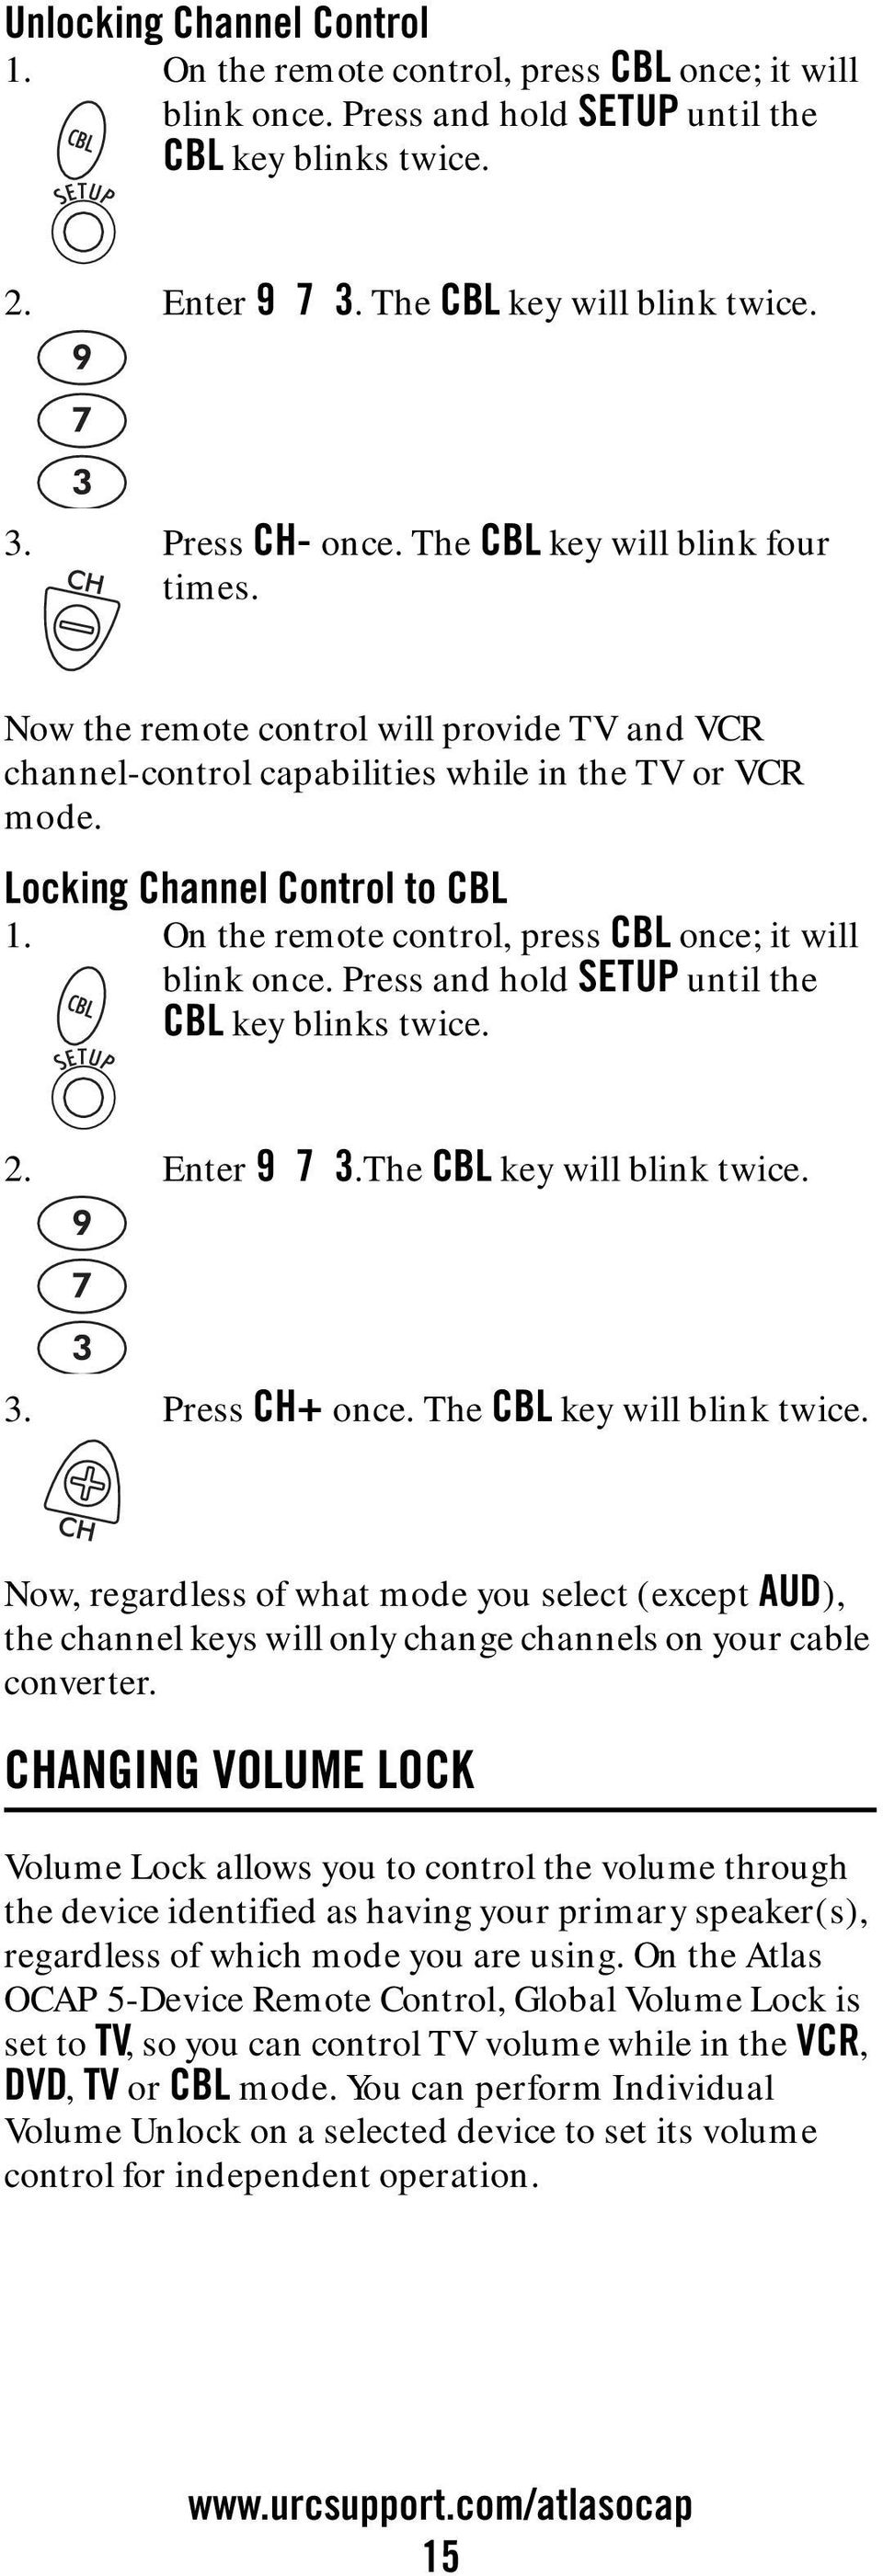 On the remote control, press CBL once; it will blink once. Press and hold SETUP until the CBL key blinks twice. 2. Enter 9 7 3.The CBL key will blink twice. 3. Press CH+ once.